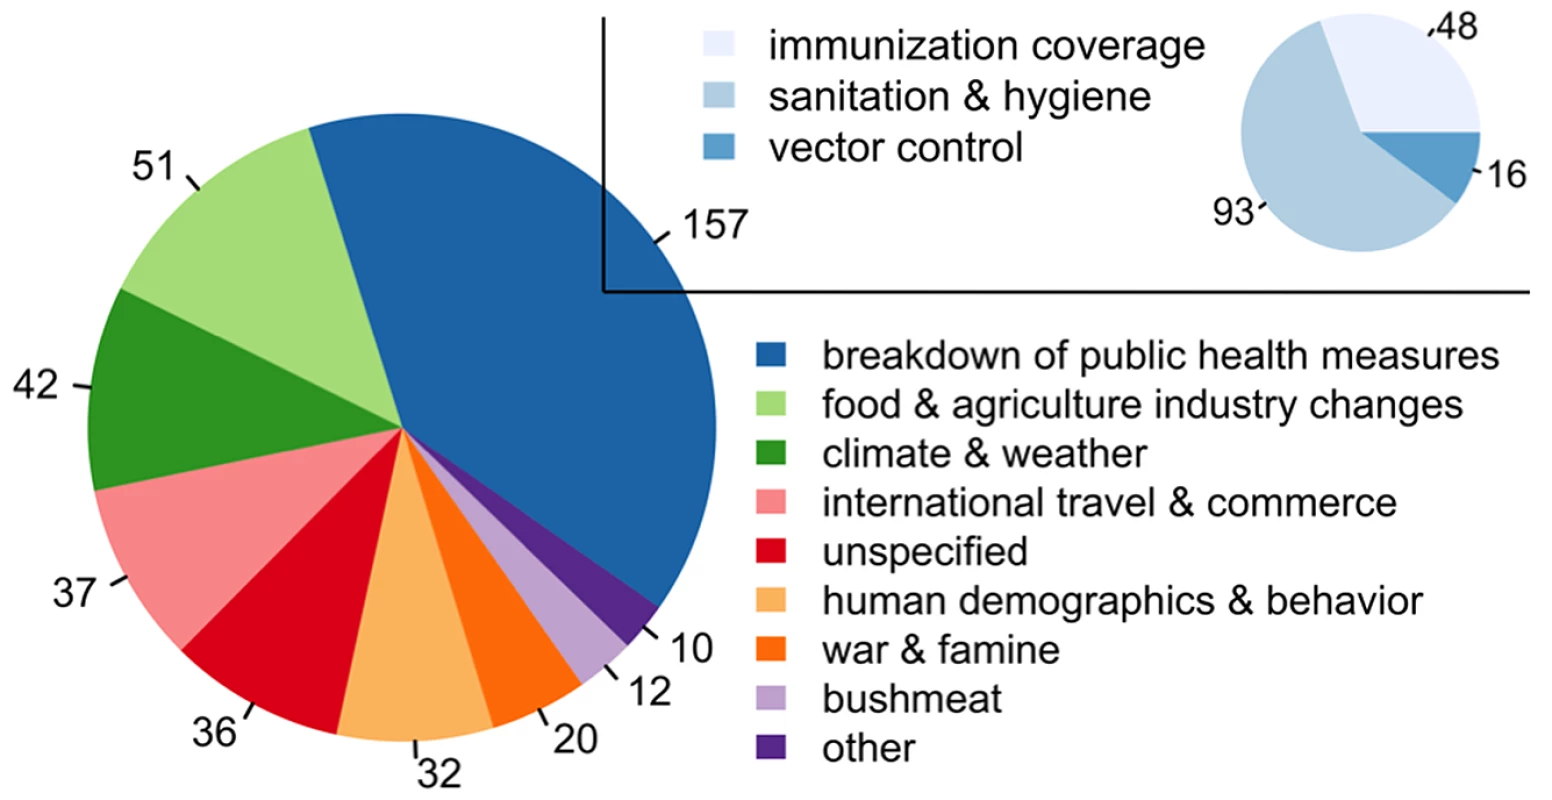 The number of outbreaks by driver, with the subplot representing the subdrivers within the category “breakdown of public health measures” (<em class=&quot;ref&quot;>Table S3</em>).